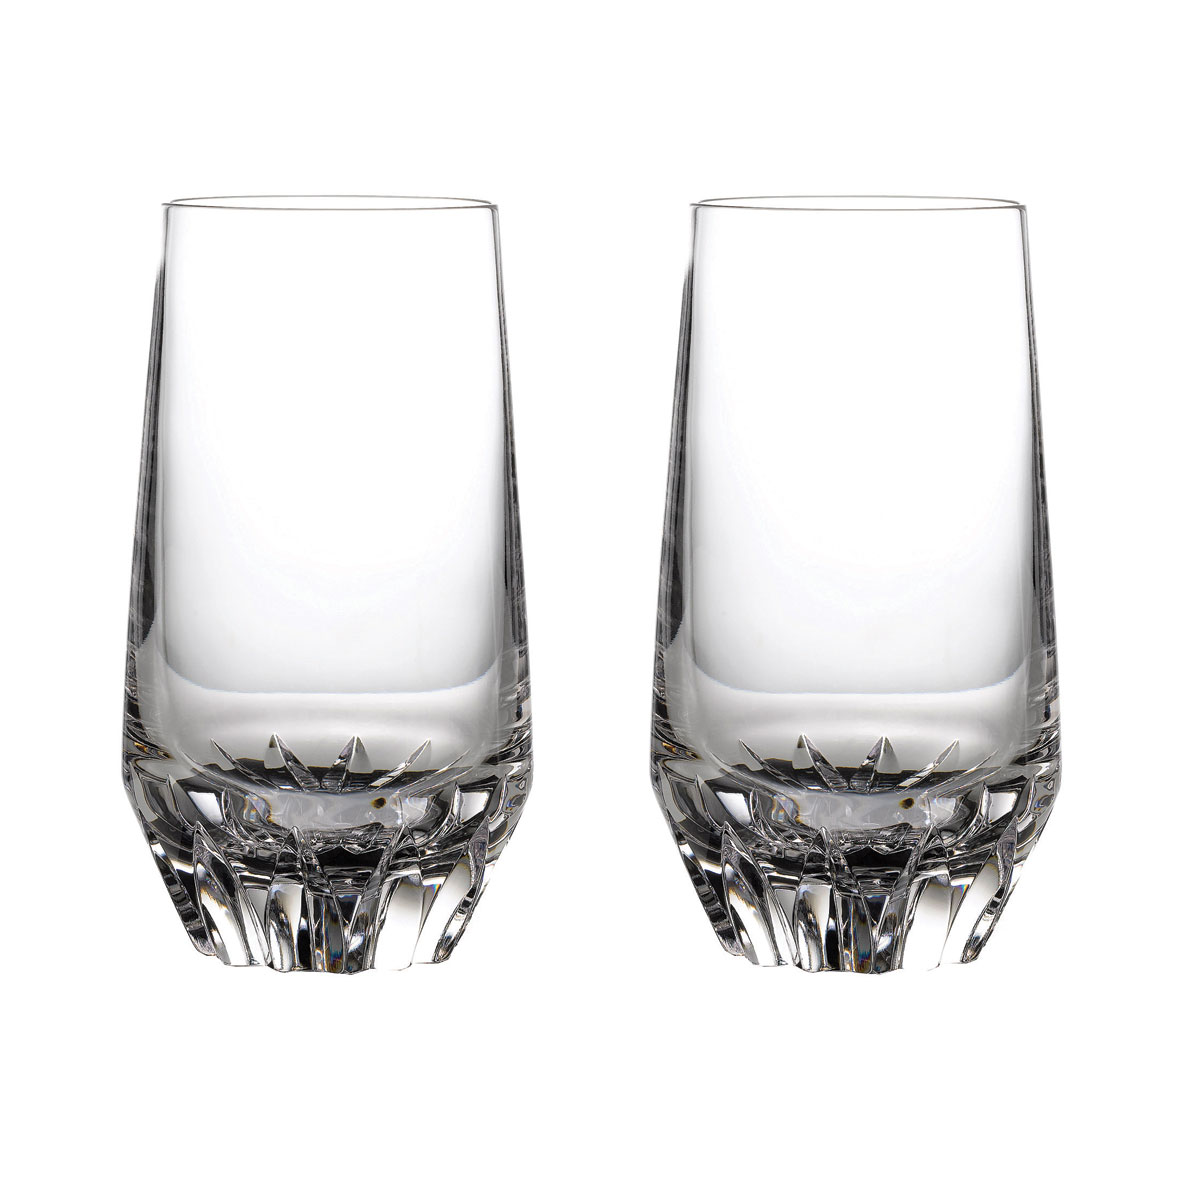 Waterford Crystal Irish Dogs Hiball Cocktail Glasses, Pair